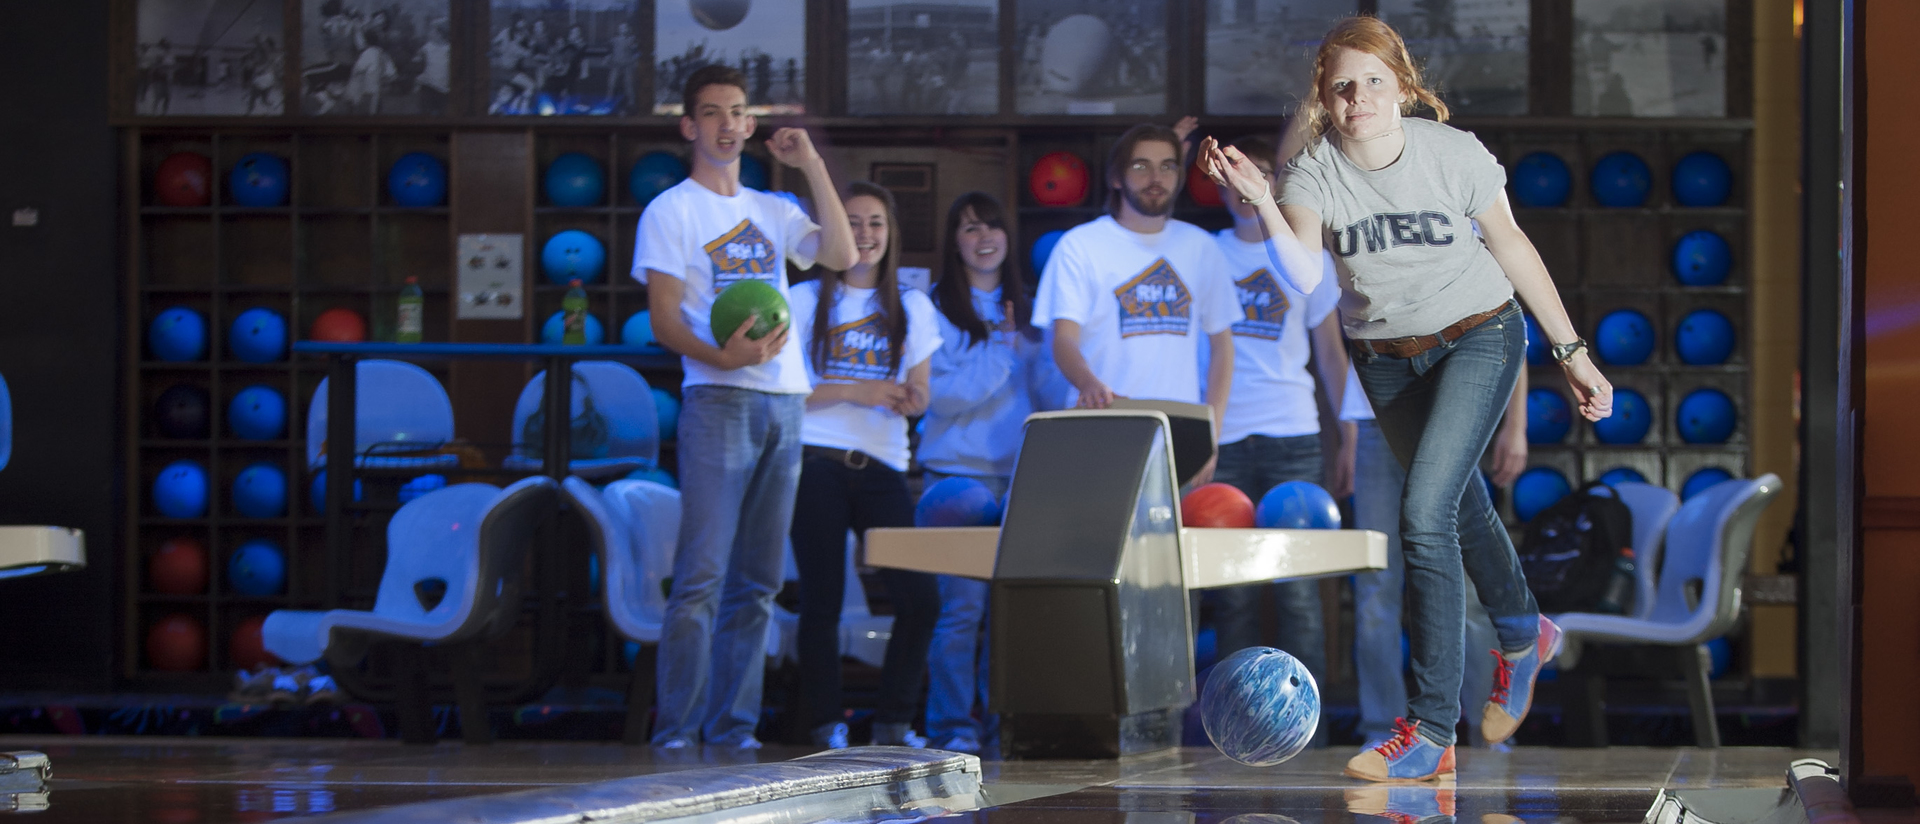 Students bowling in Hilltop Center